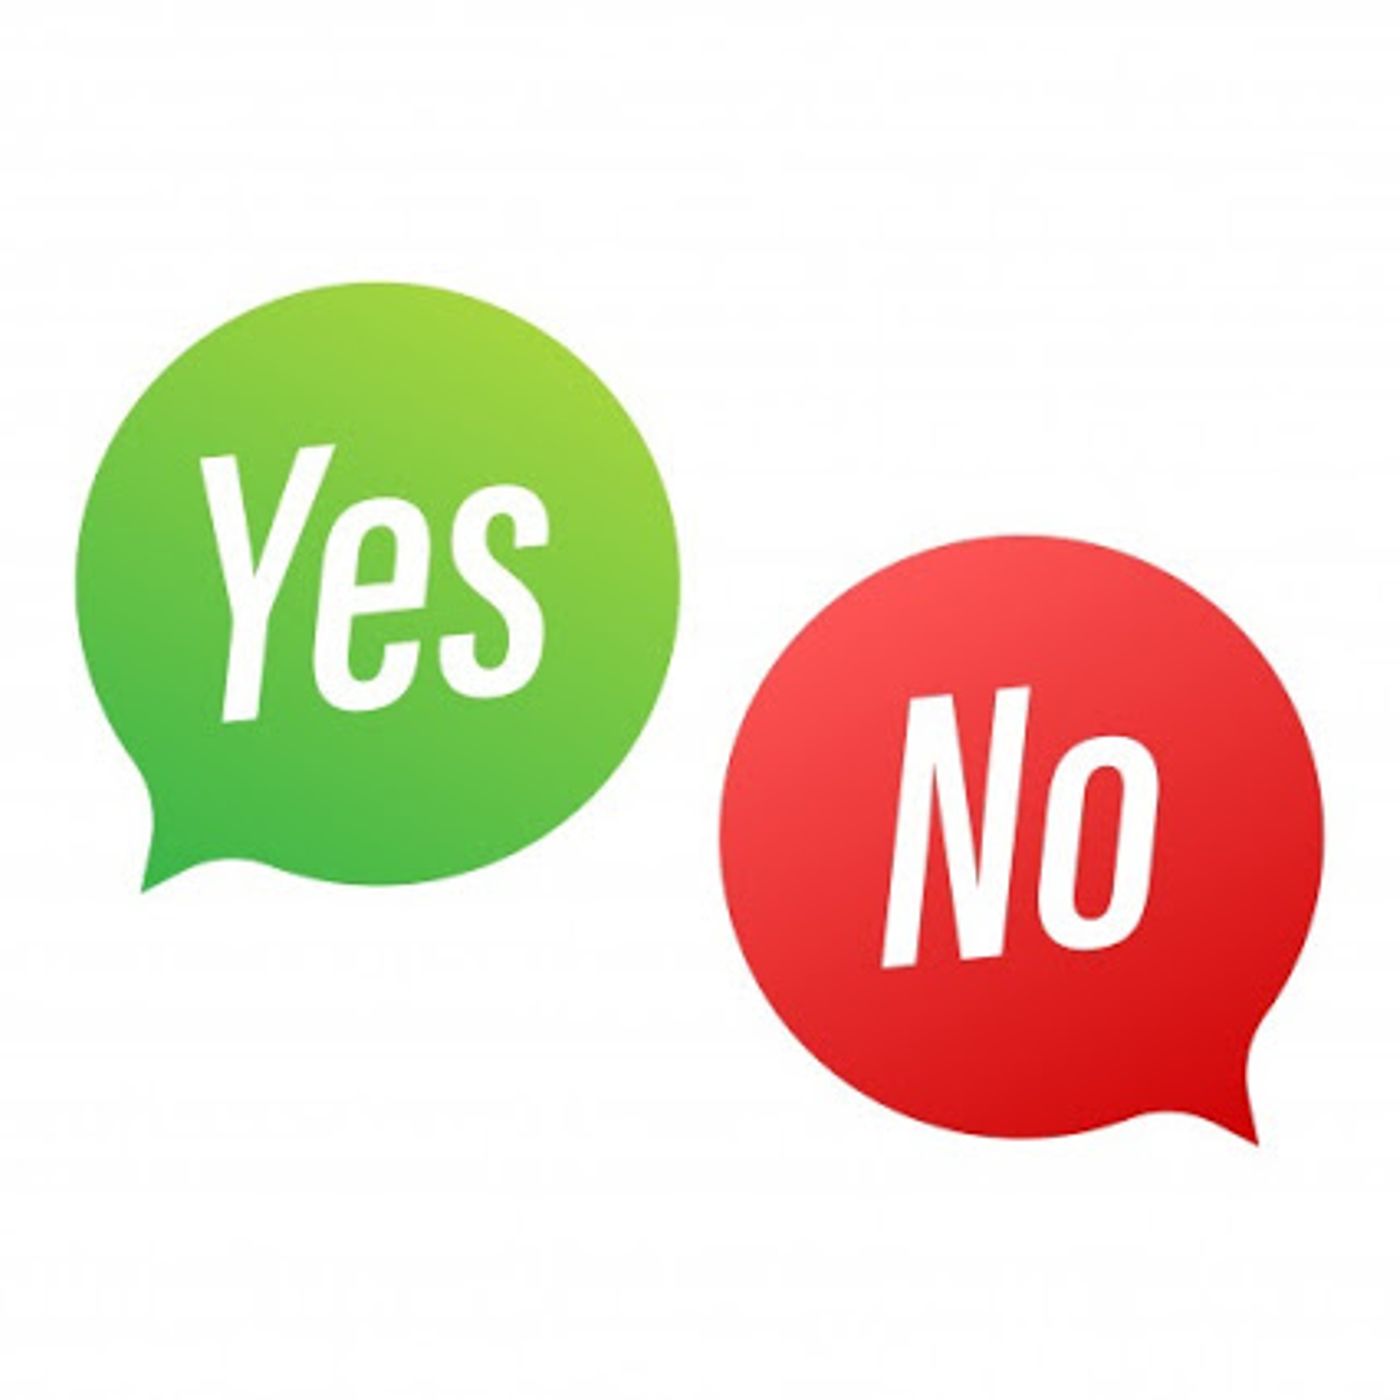 Bible Study Exercise: Yes and No